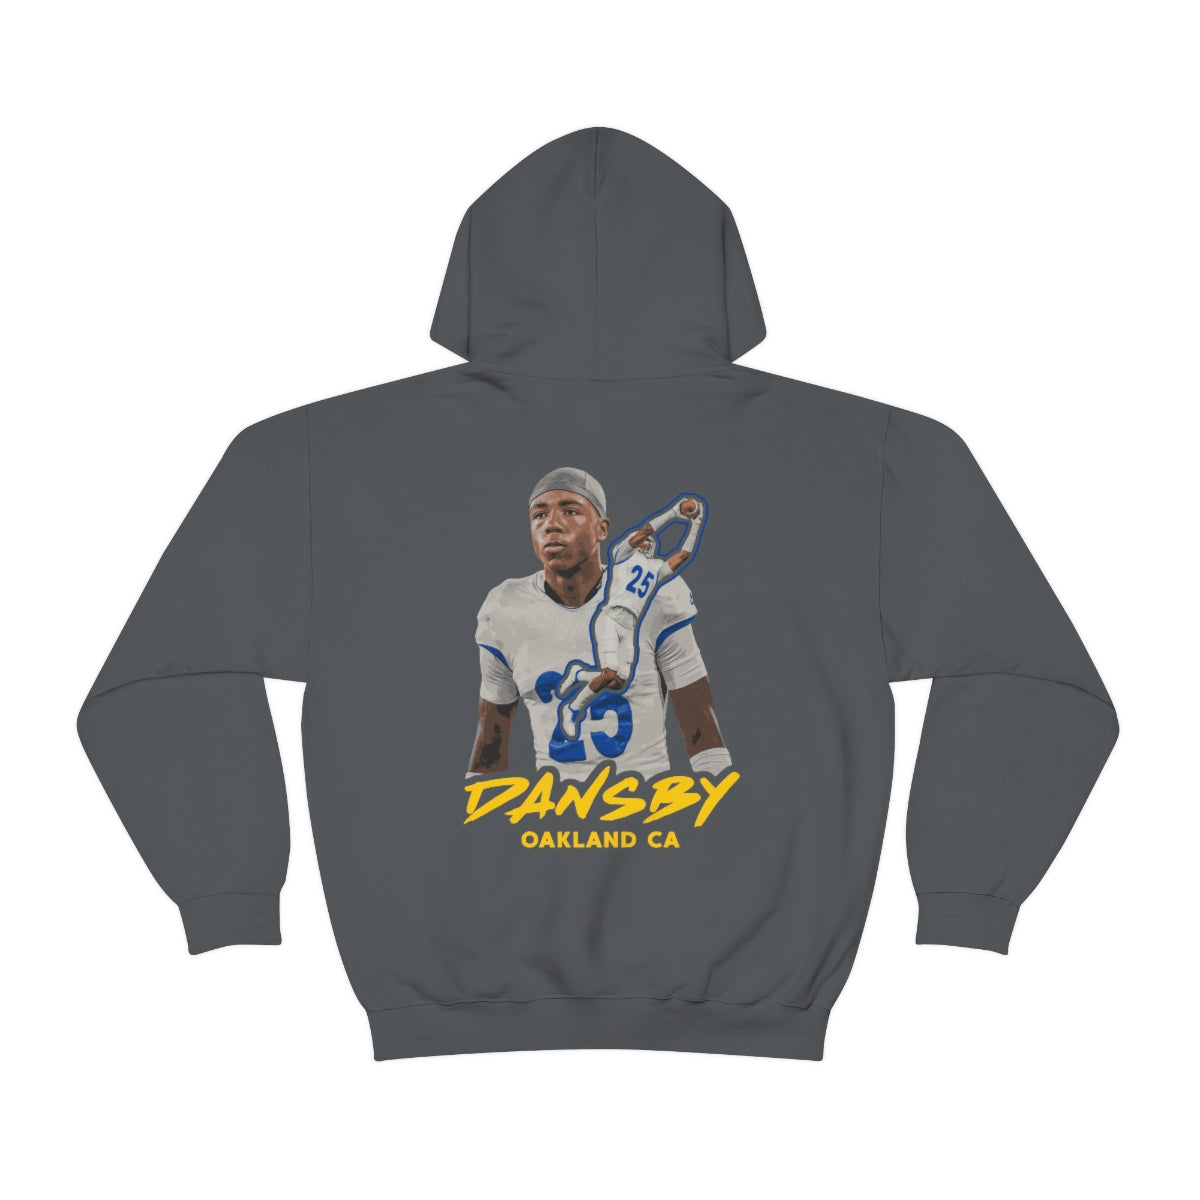 MICHAEL DANSBY DOUBLE-SIDED HOODIE